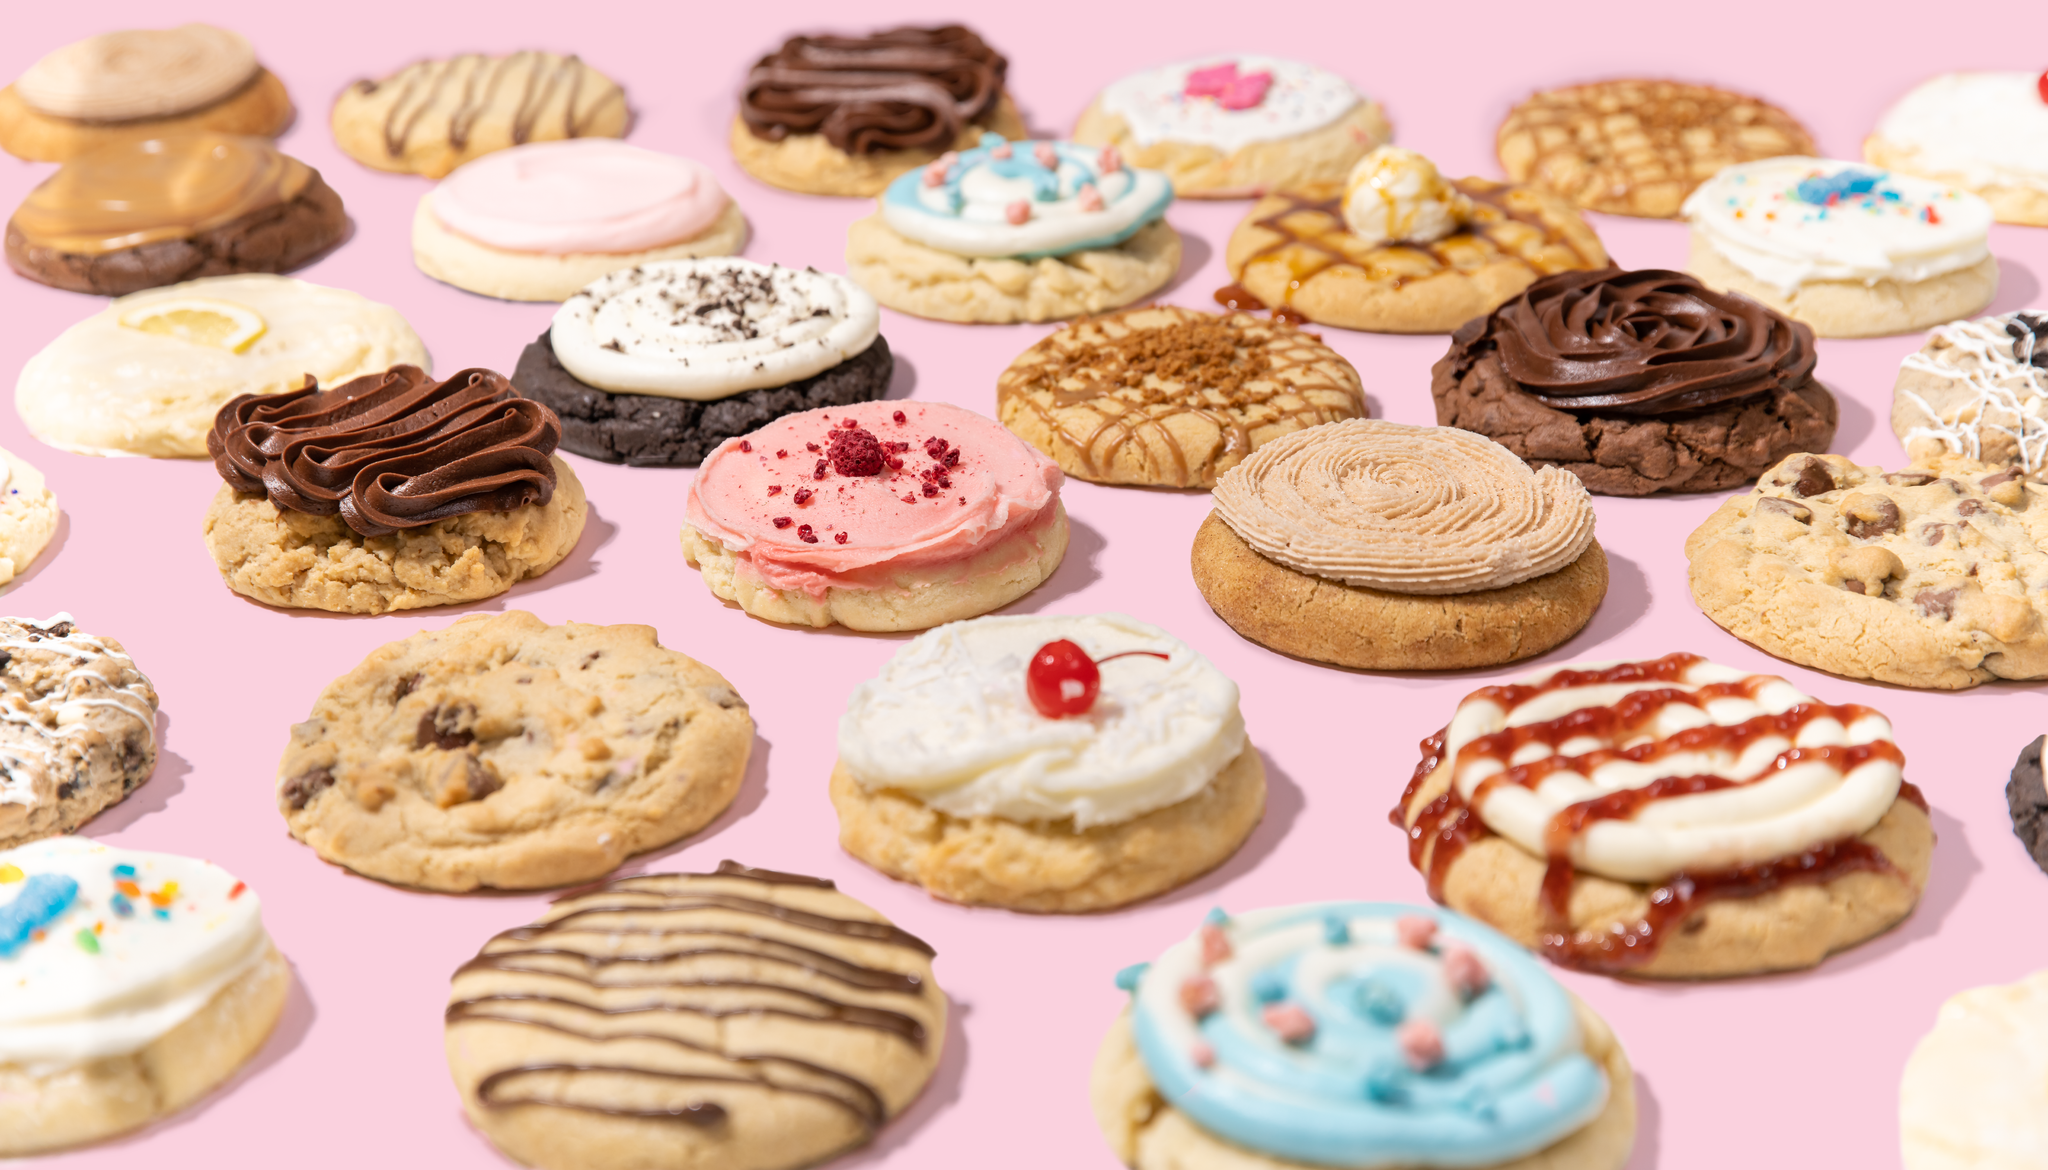 Crumbl Cookies will soon be making its Tallahassee debut